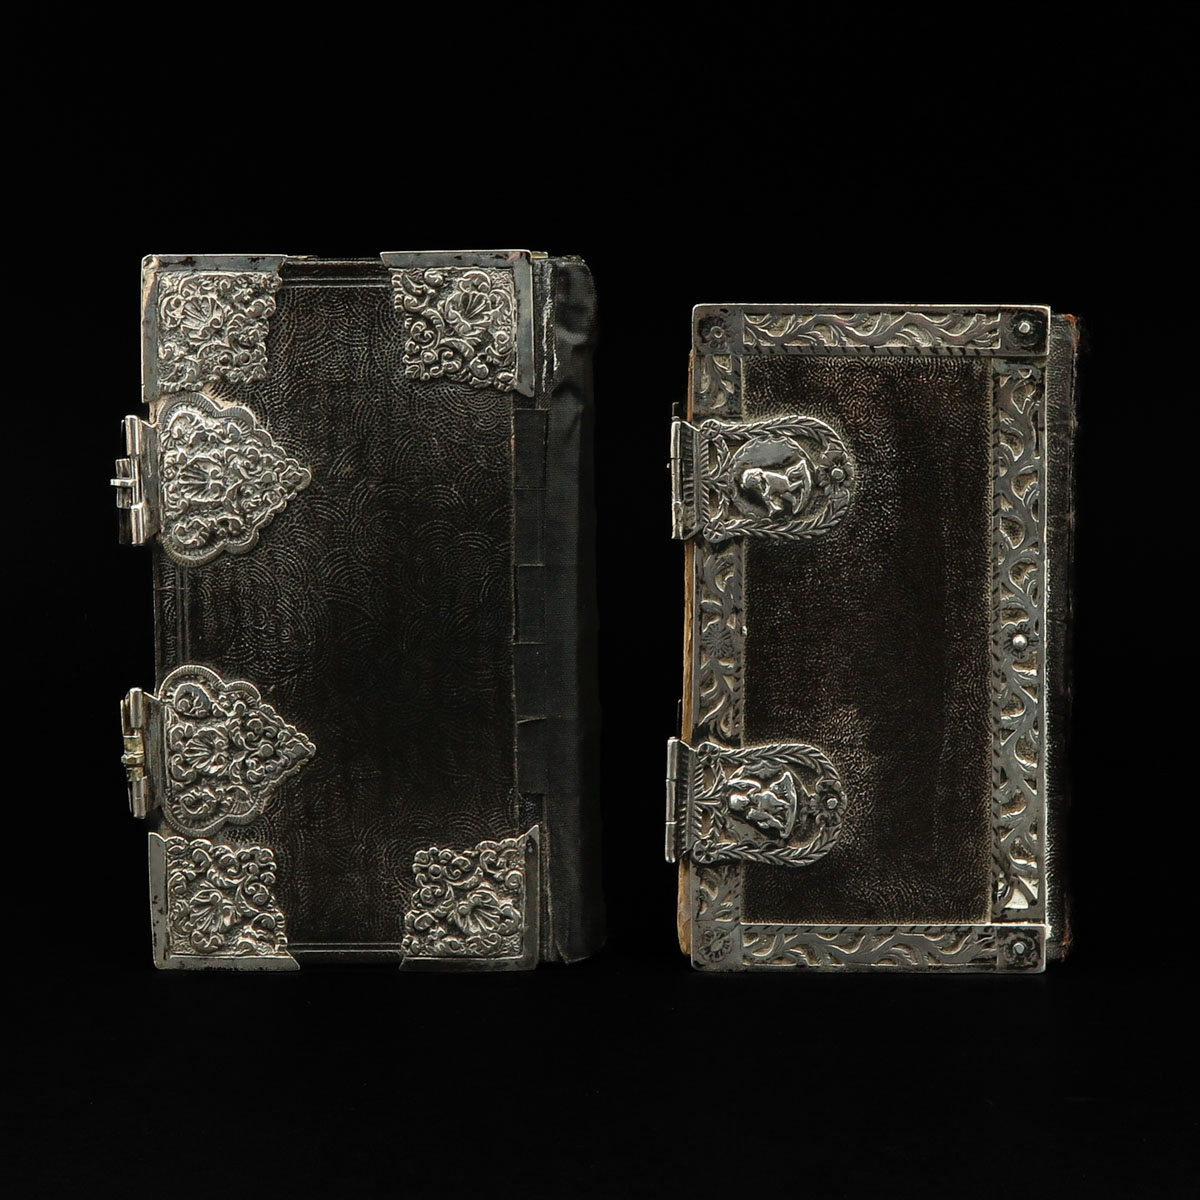 A Lot of 2 Bibles - Image 2 of 10